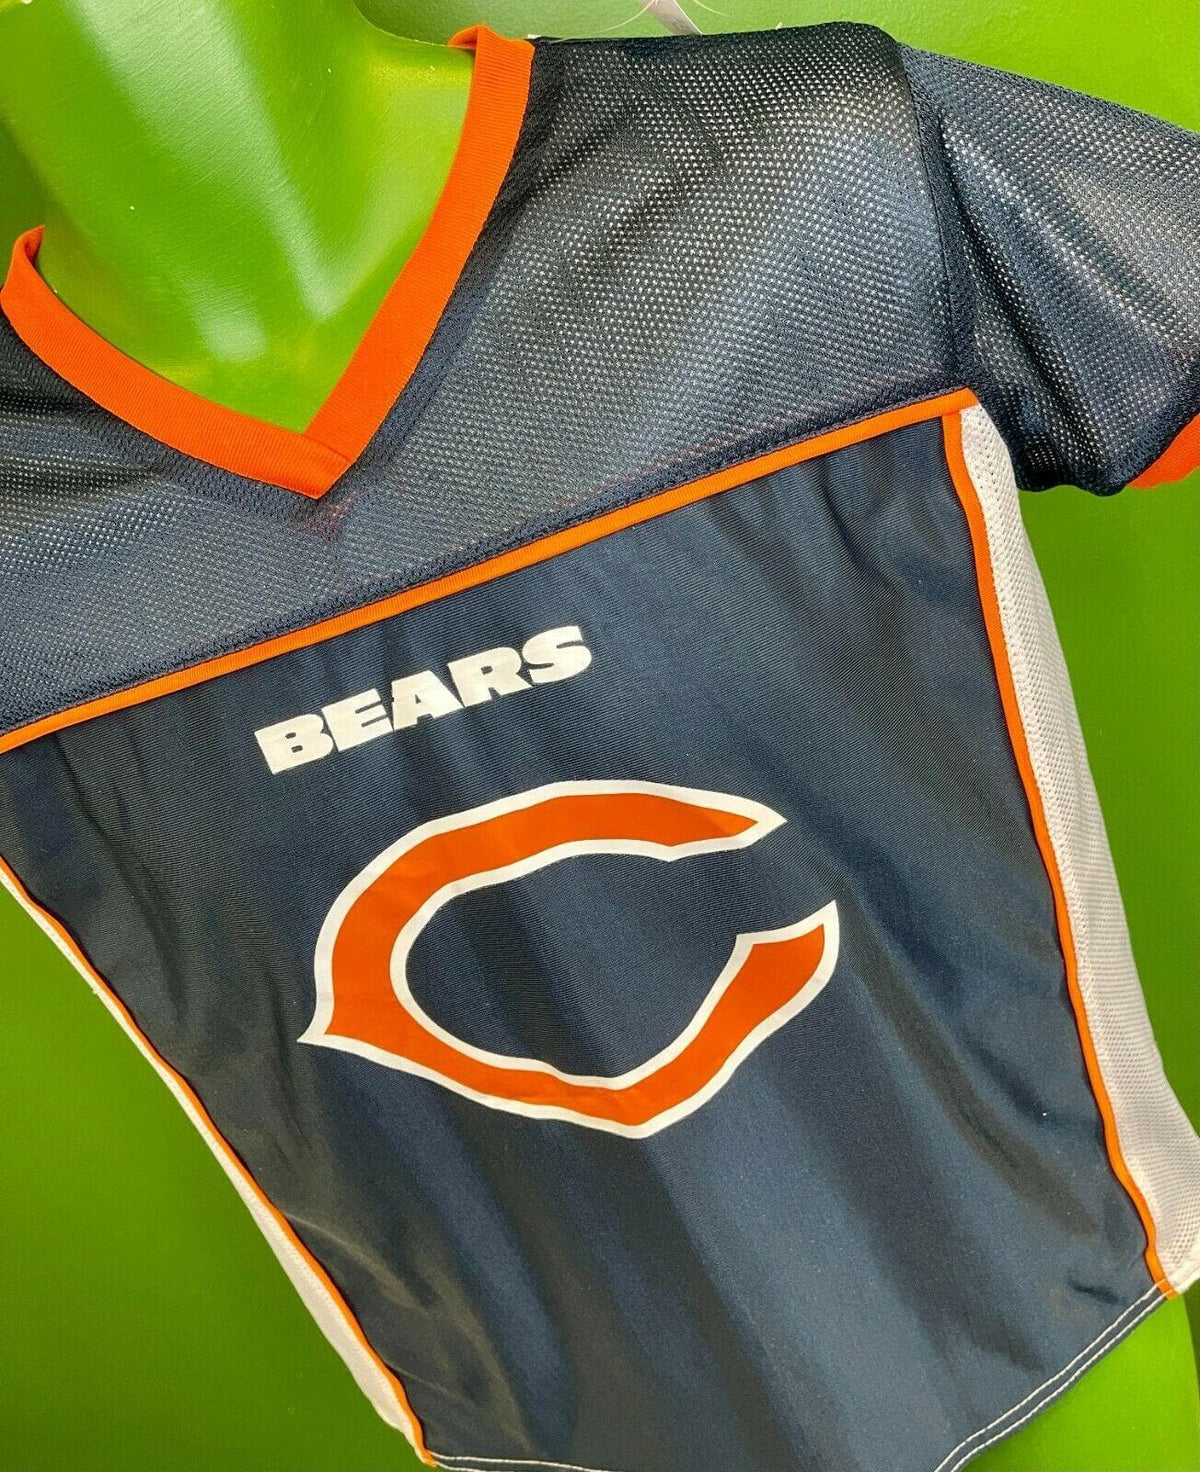 NFL Chicago Bears Reversible Flag Football Jersey Youth X-Large 16-18